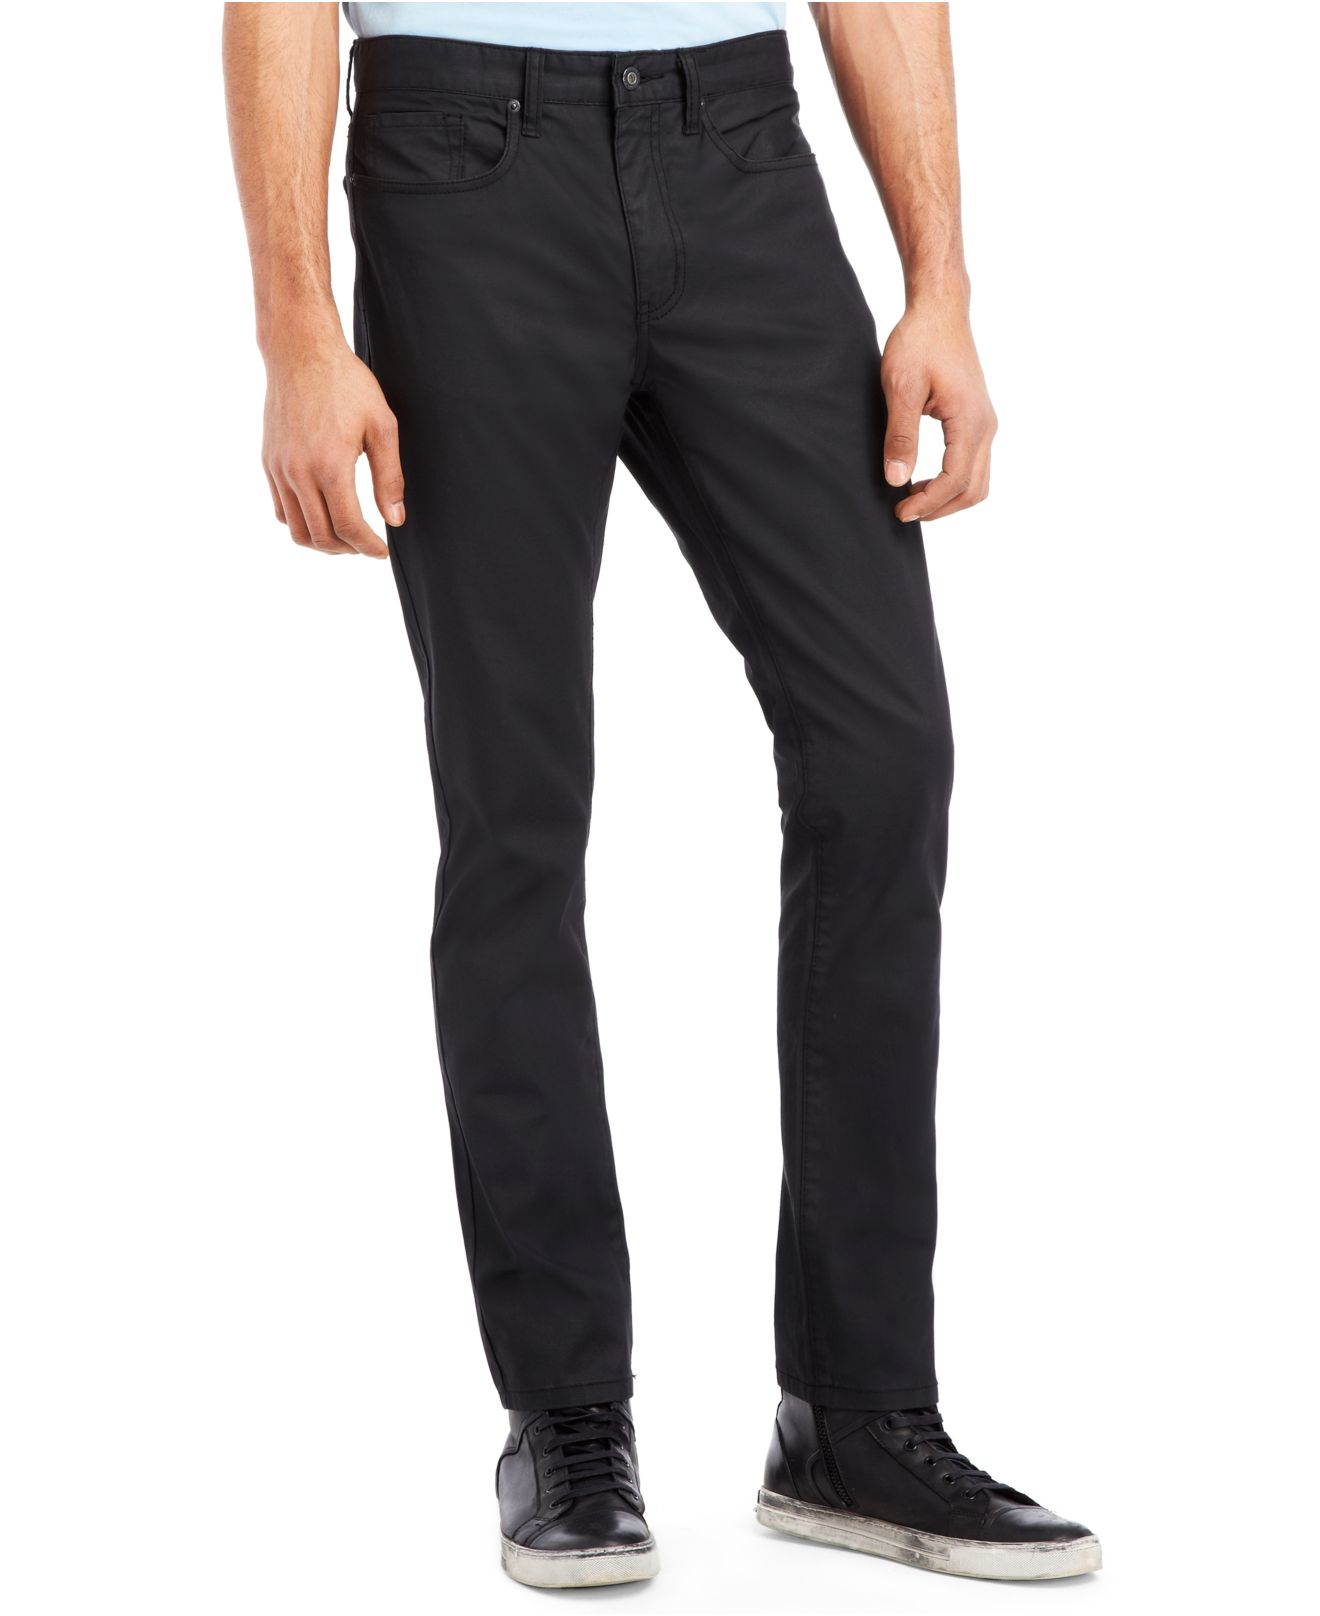 Lyst - Kenneth Cole Reaction Coated Twill Jeans in Black for Men